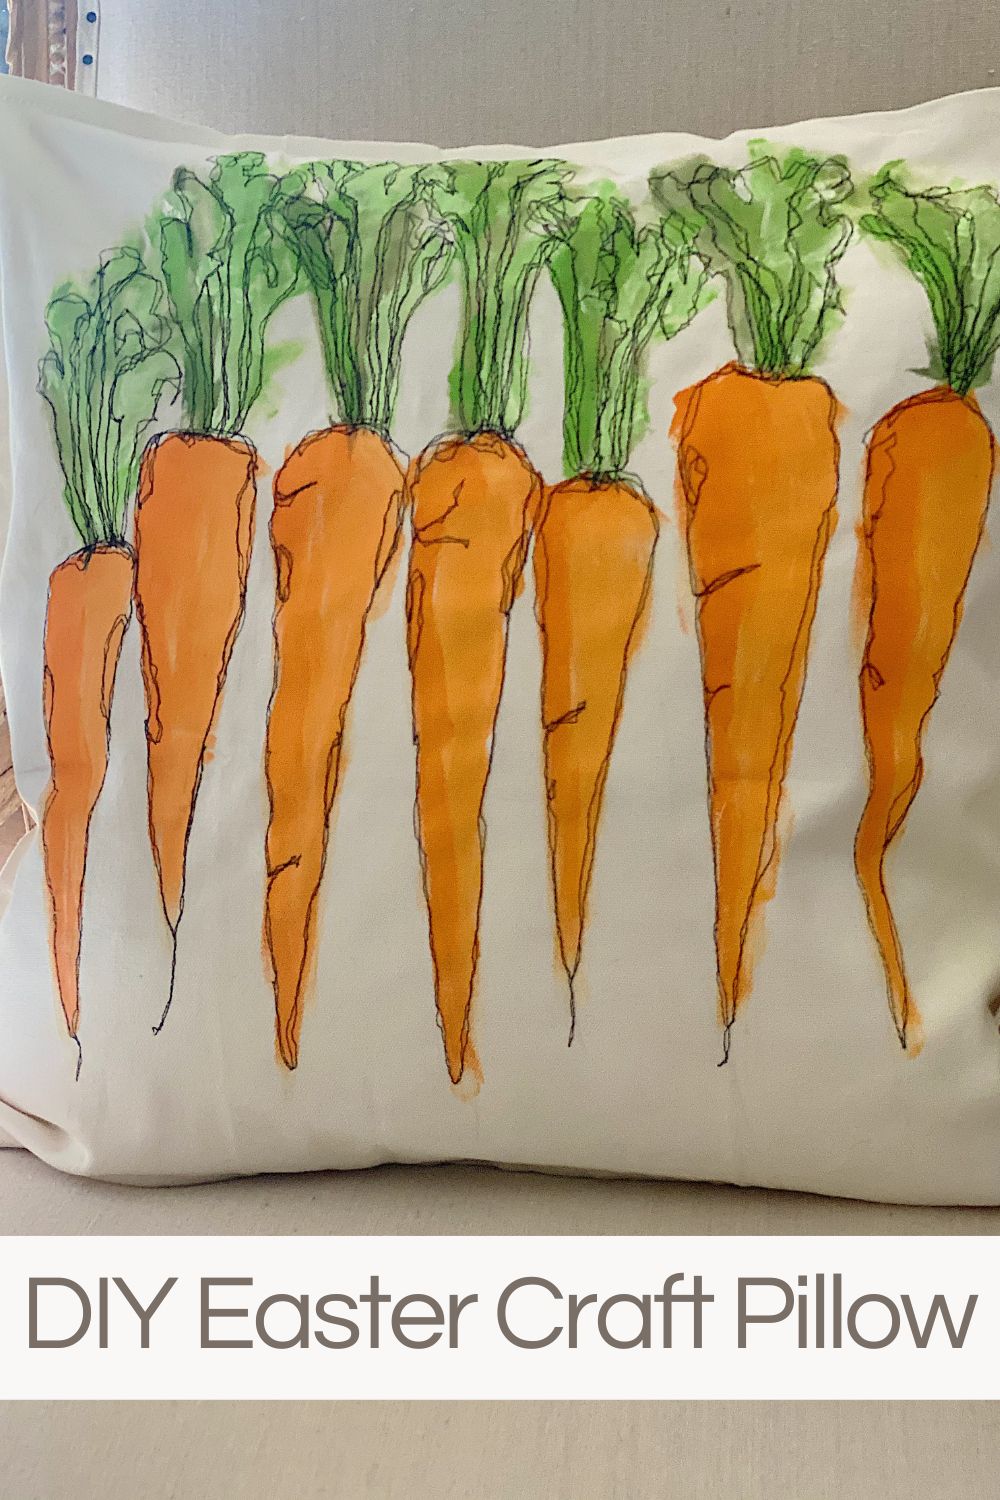 Today I am sharing a DIY Easter craft pillow. You can make this Free Stitch Embroidered pillow with carrots.